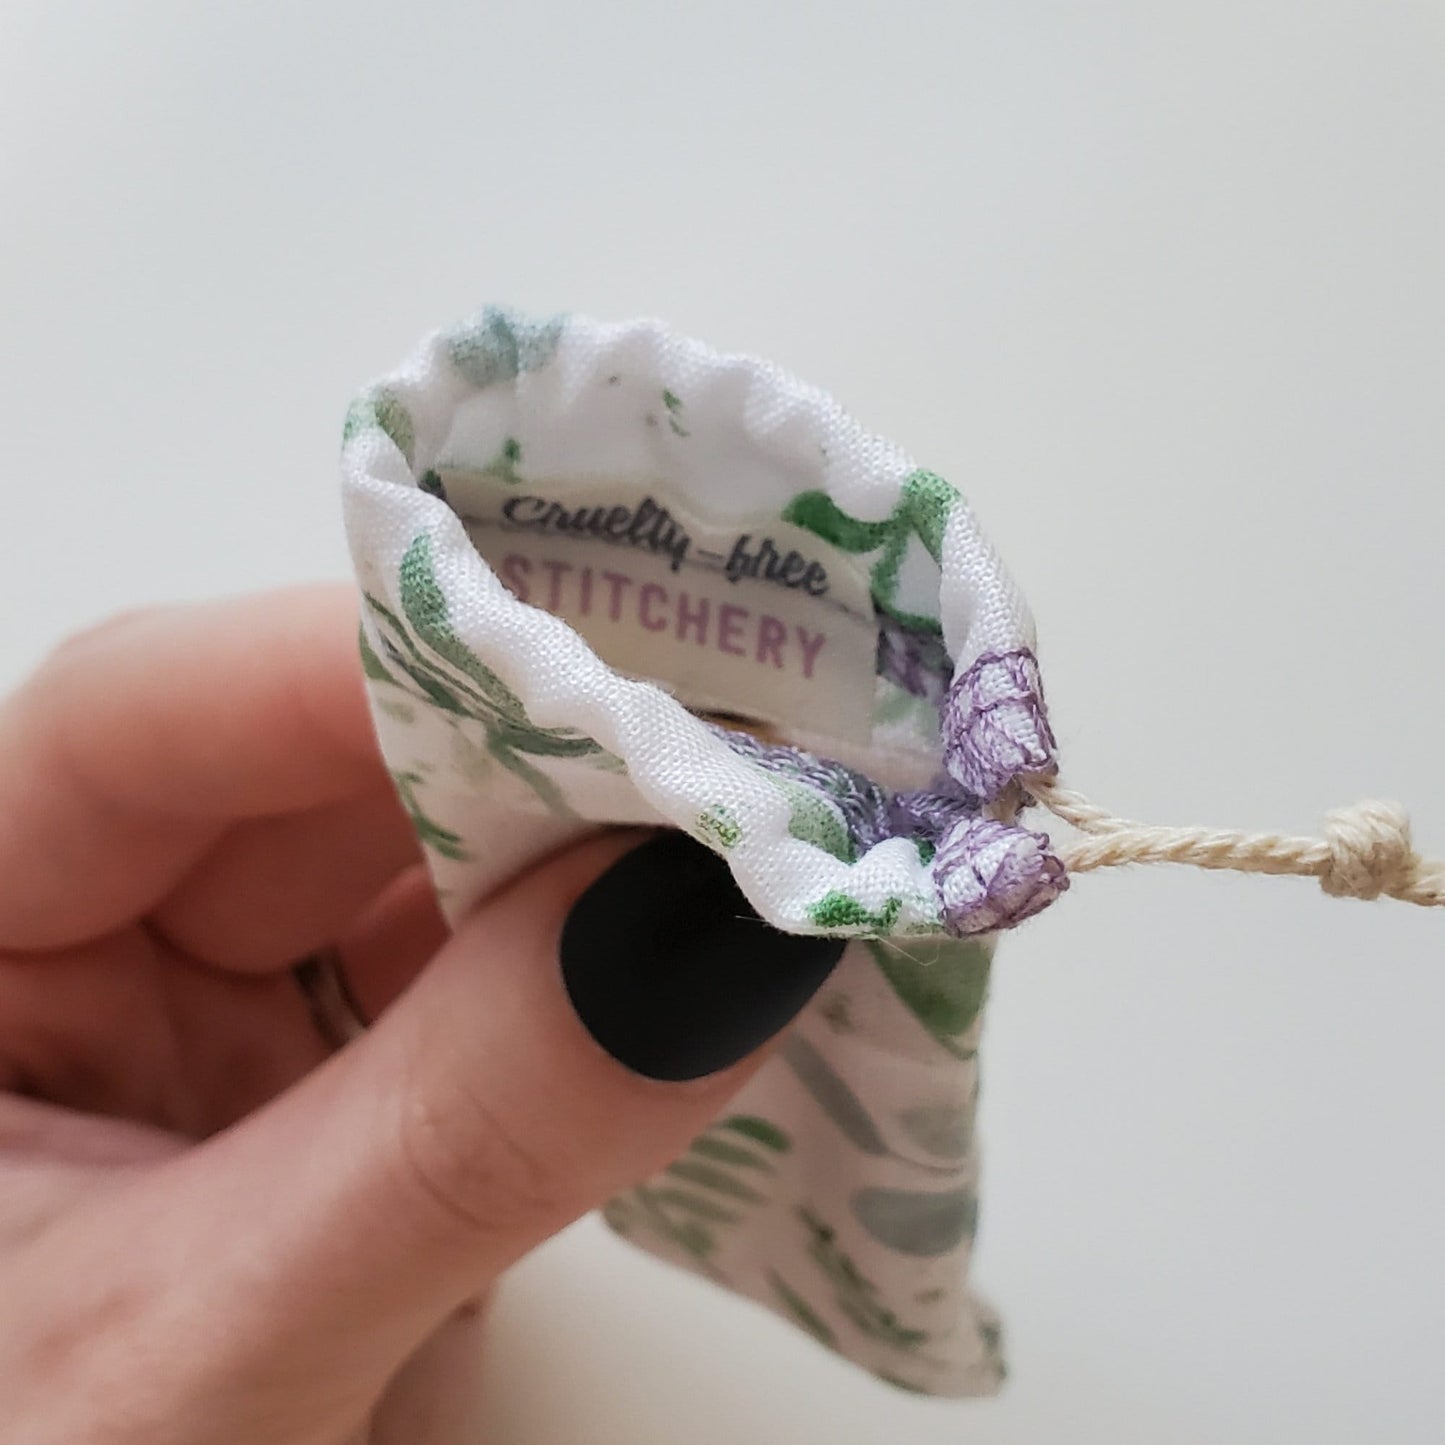 A reusable spork pouch, viewed from the top down. Inside the pouch is a tag with the Cruelty-Free Stitchery logo. The pouch is in someone's hand, the width is about half as wide as the thumb is long.